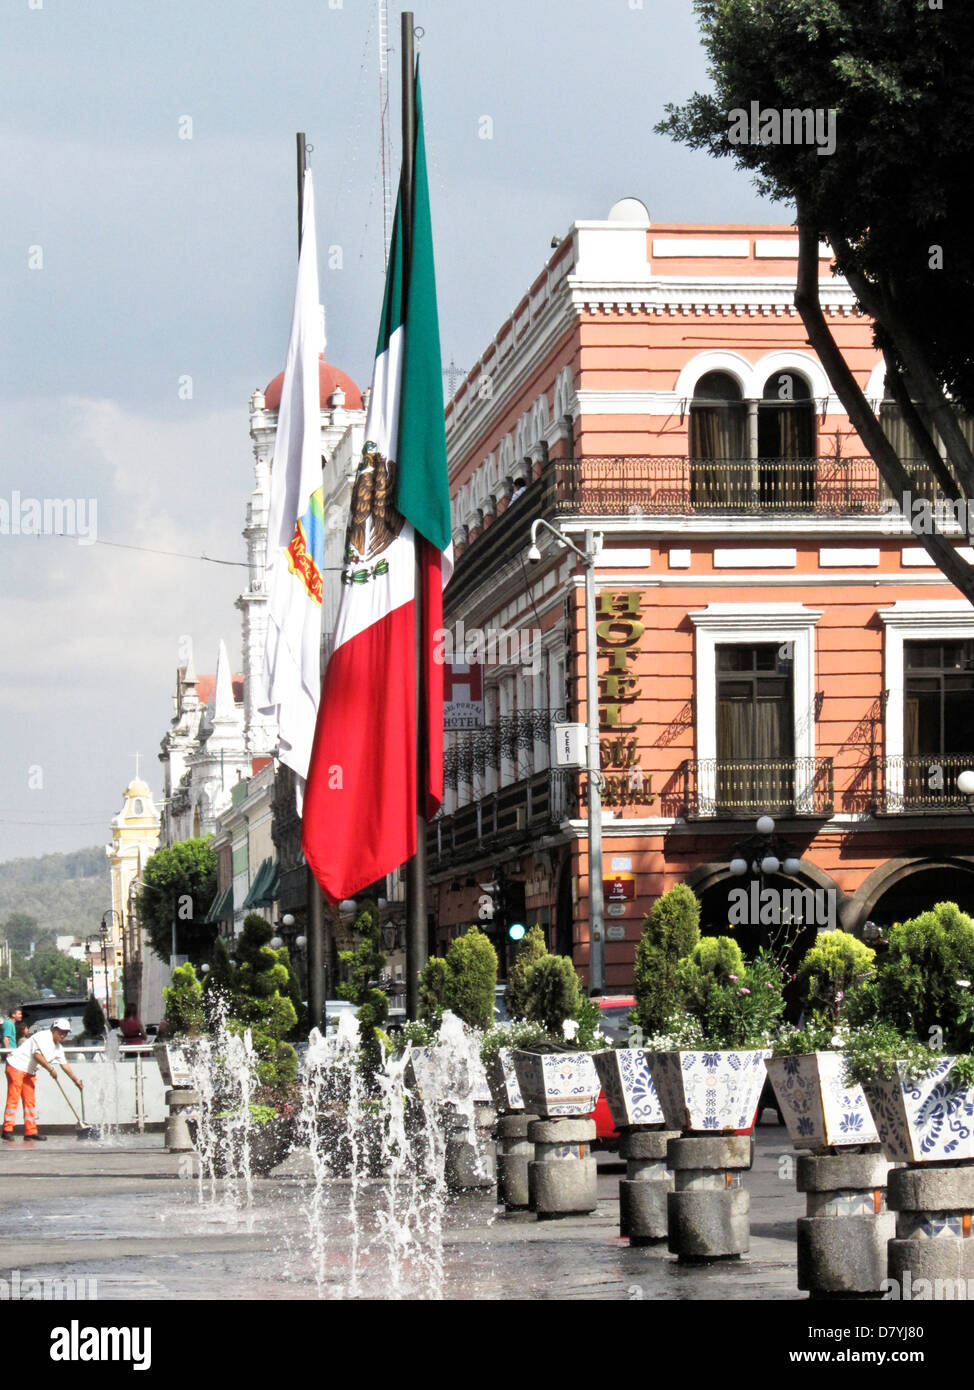 Mexican flag on post outside Palacio Municipal above play area with water jet fountains defined by shrubs atop traffic bollards Stock Photo